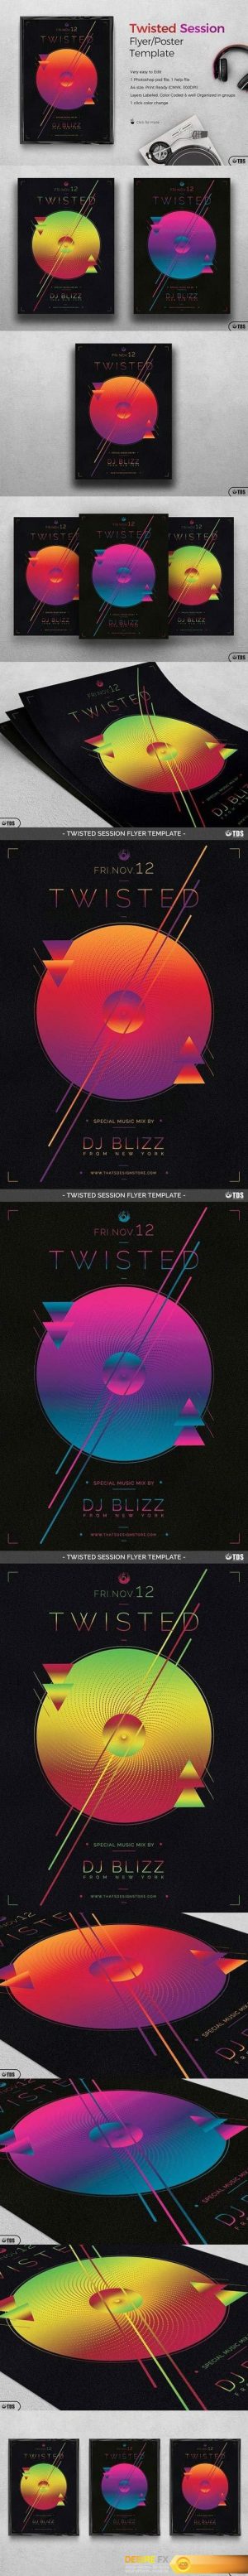 Twisted Session Flyer Template